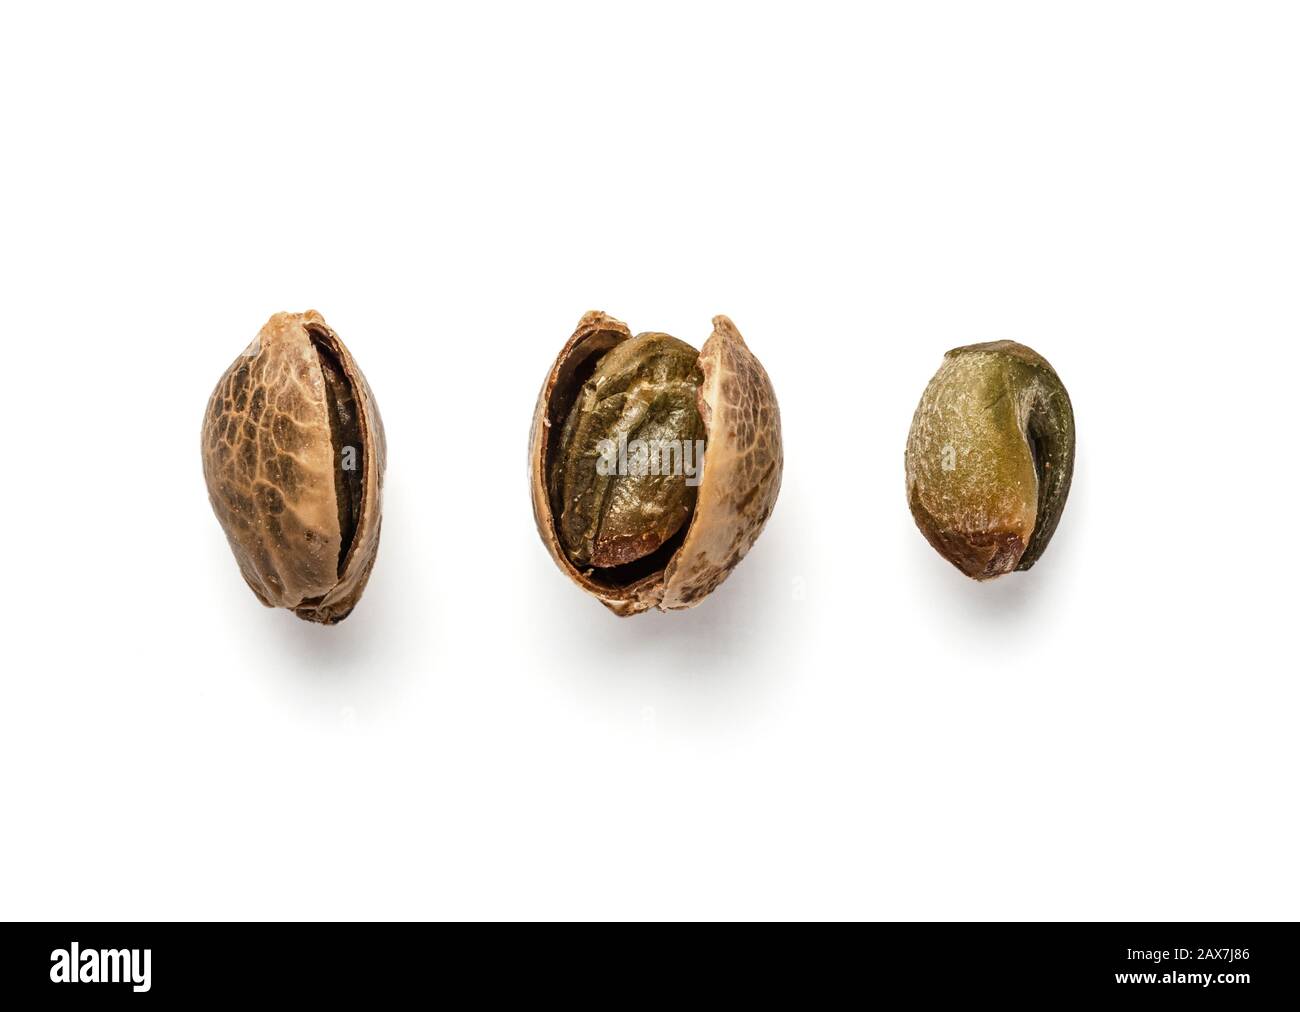 Creative layout of hemp seeds. Superfood hemp concept. Top view of three cannabis or hemp seeds in shell, open shell and unshelled seed kernel. Isolated on white with clipping path. Stock Photo